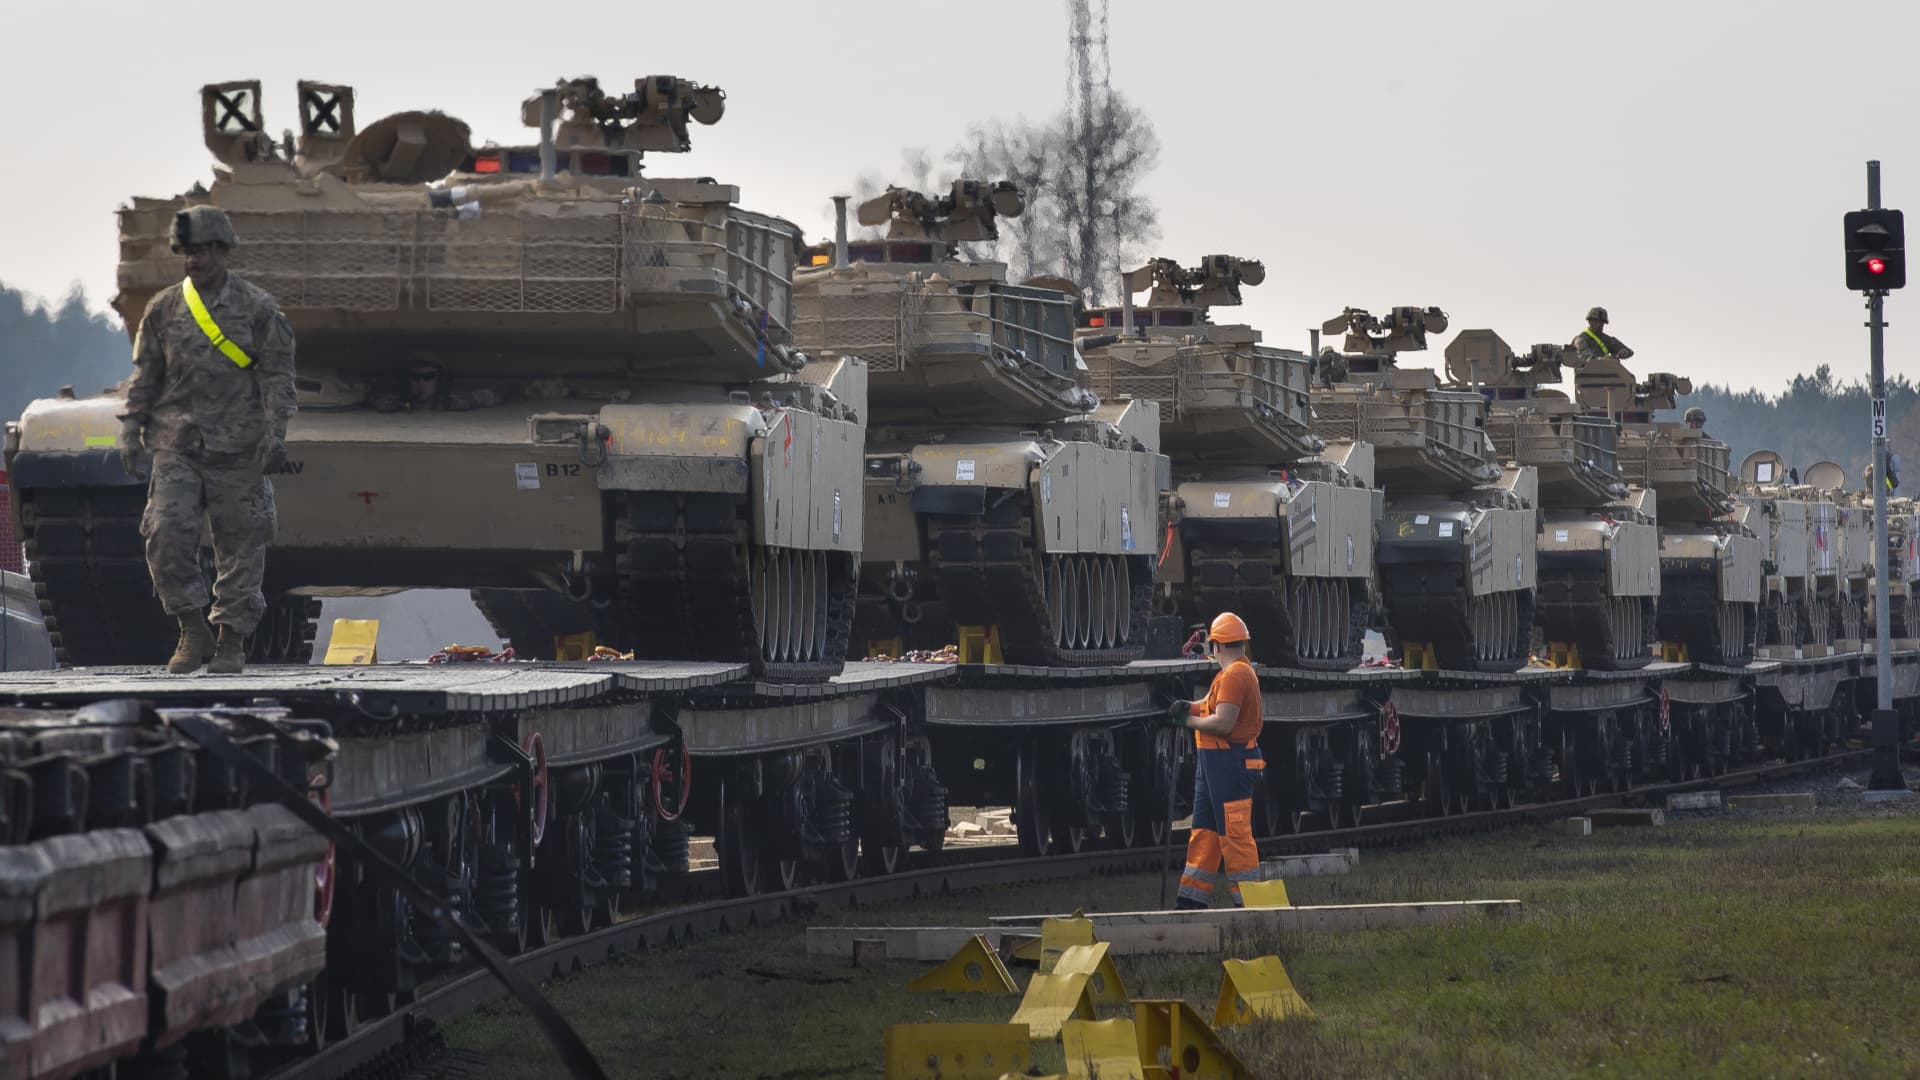 Abrams battle tanks from the US Army's, 1st Armoured Battalion of the 9th Regiment, 1st Division from Fort Hood in Texas, part of the Atlantic resolve operation, arrive at the Pabrade railway station some 50 km (31 miles) north of the capital Vilnius, Lithuania, Monday, Oct. 21, 2019.